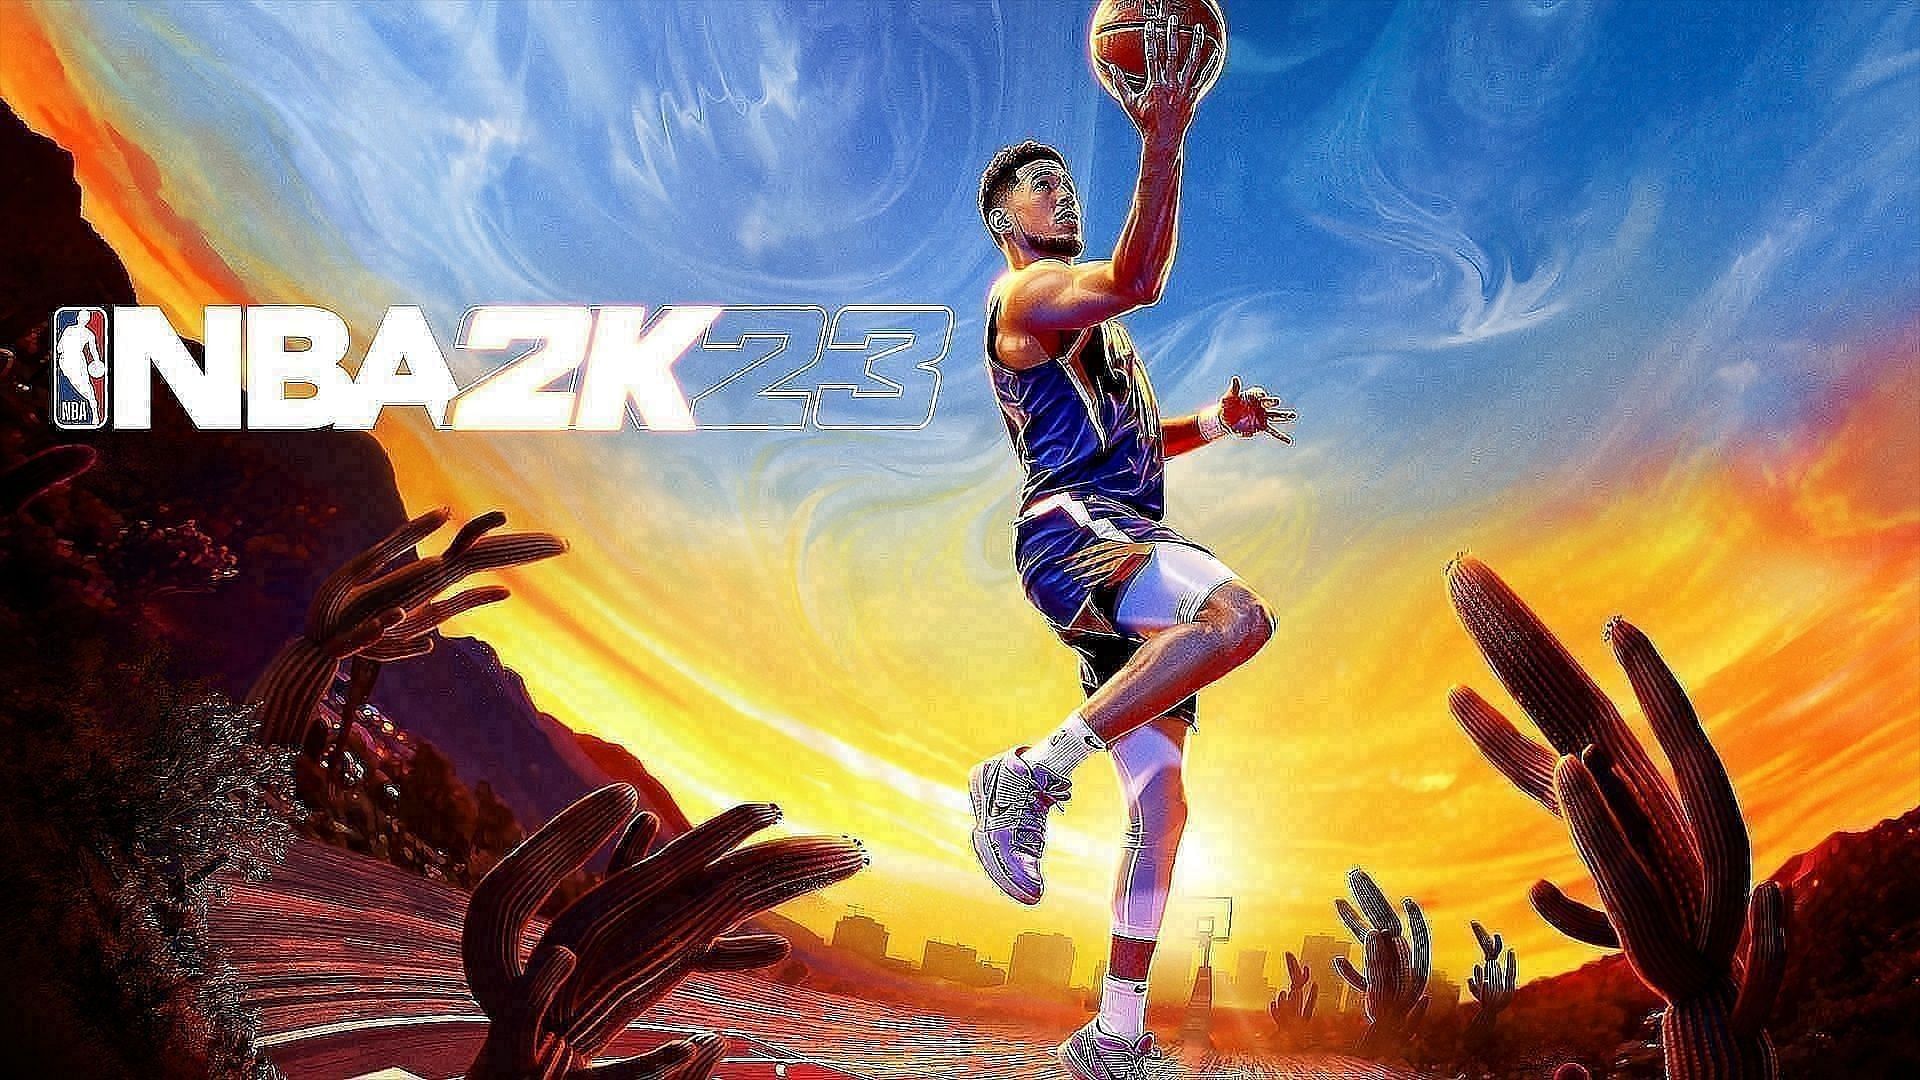 NBA 2K23 is the latest game of the 2K series that has been released.